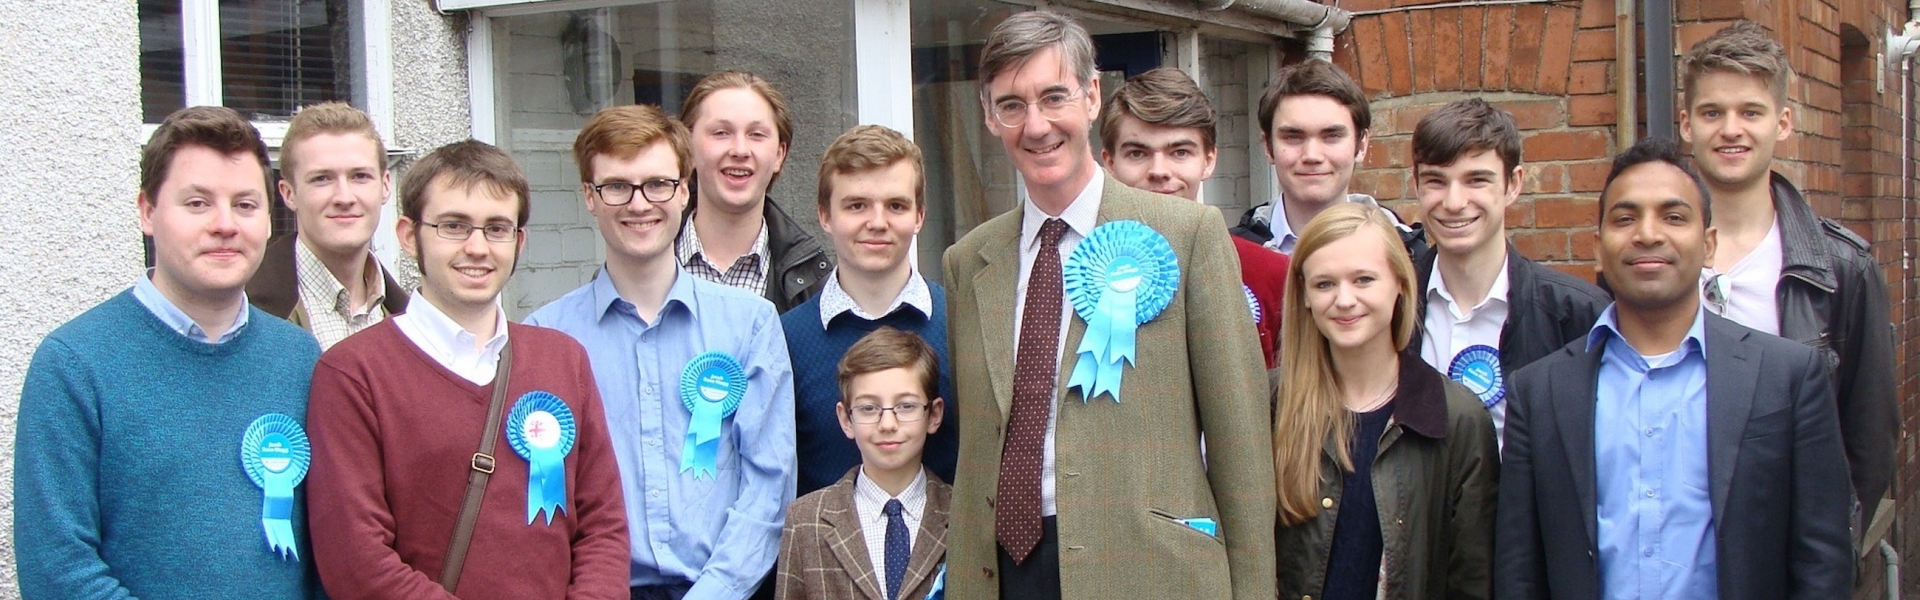 Jacob with supporters